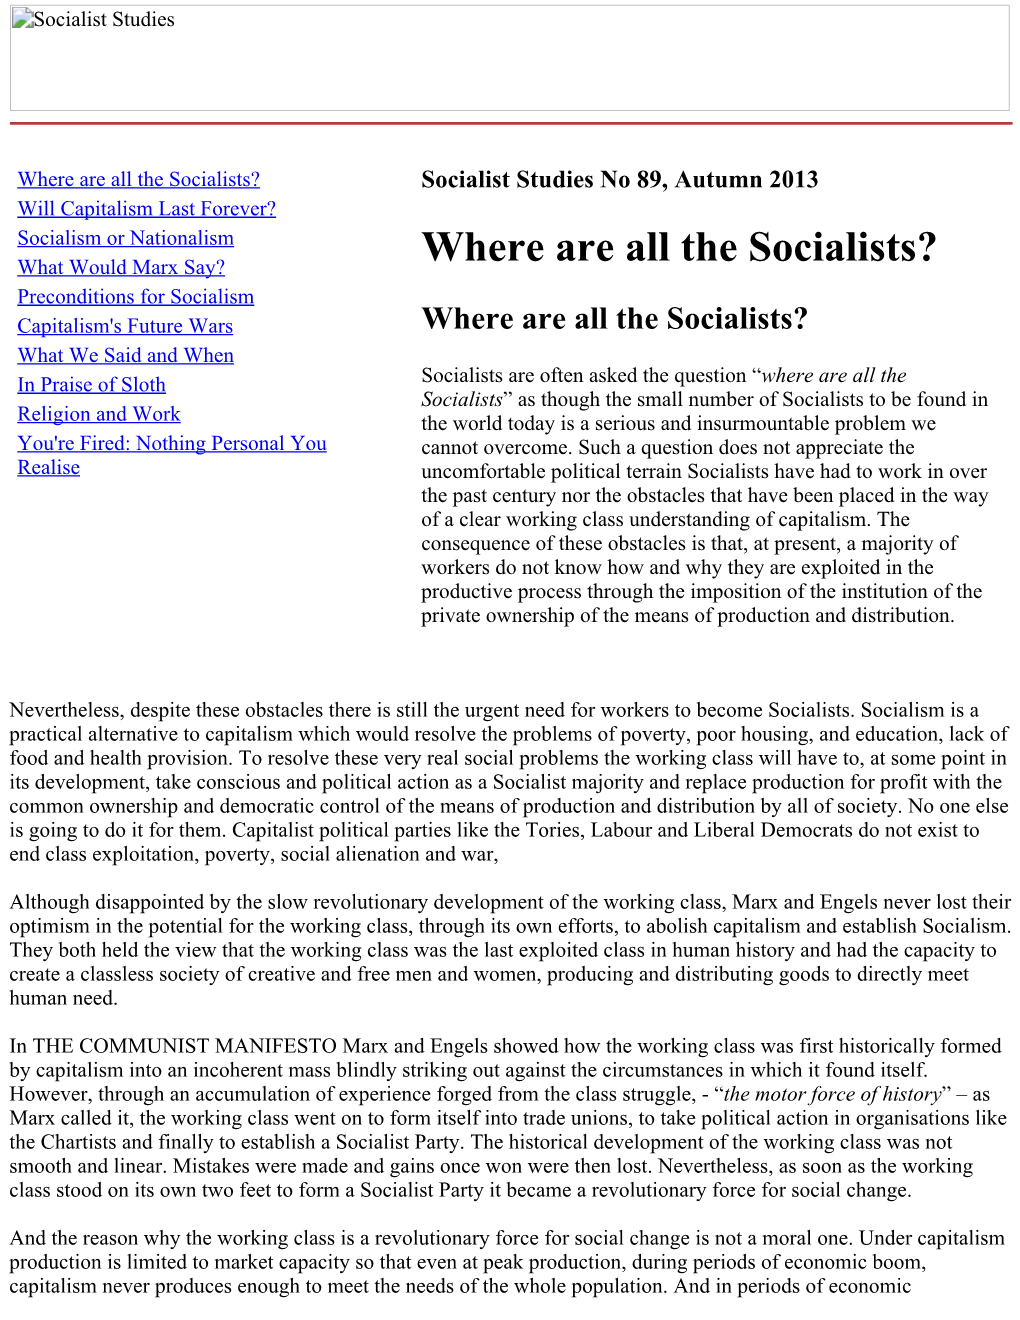 Where Are All the Socialists?